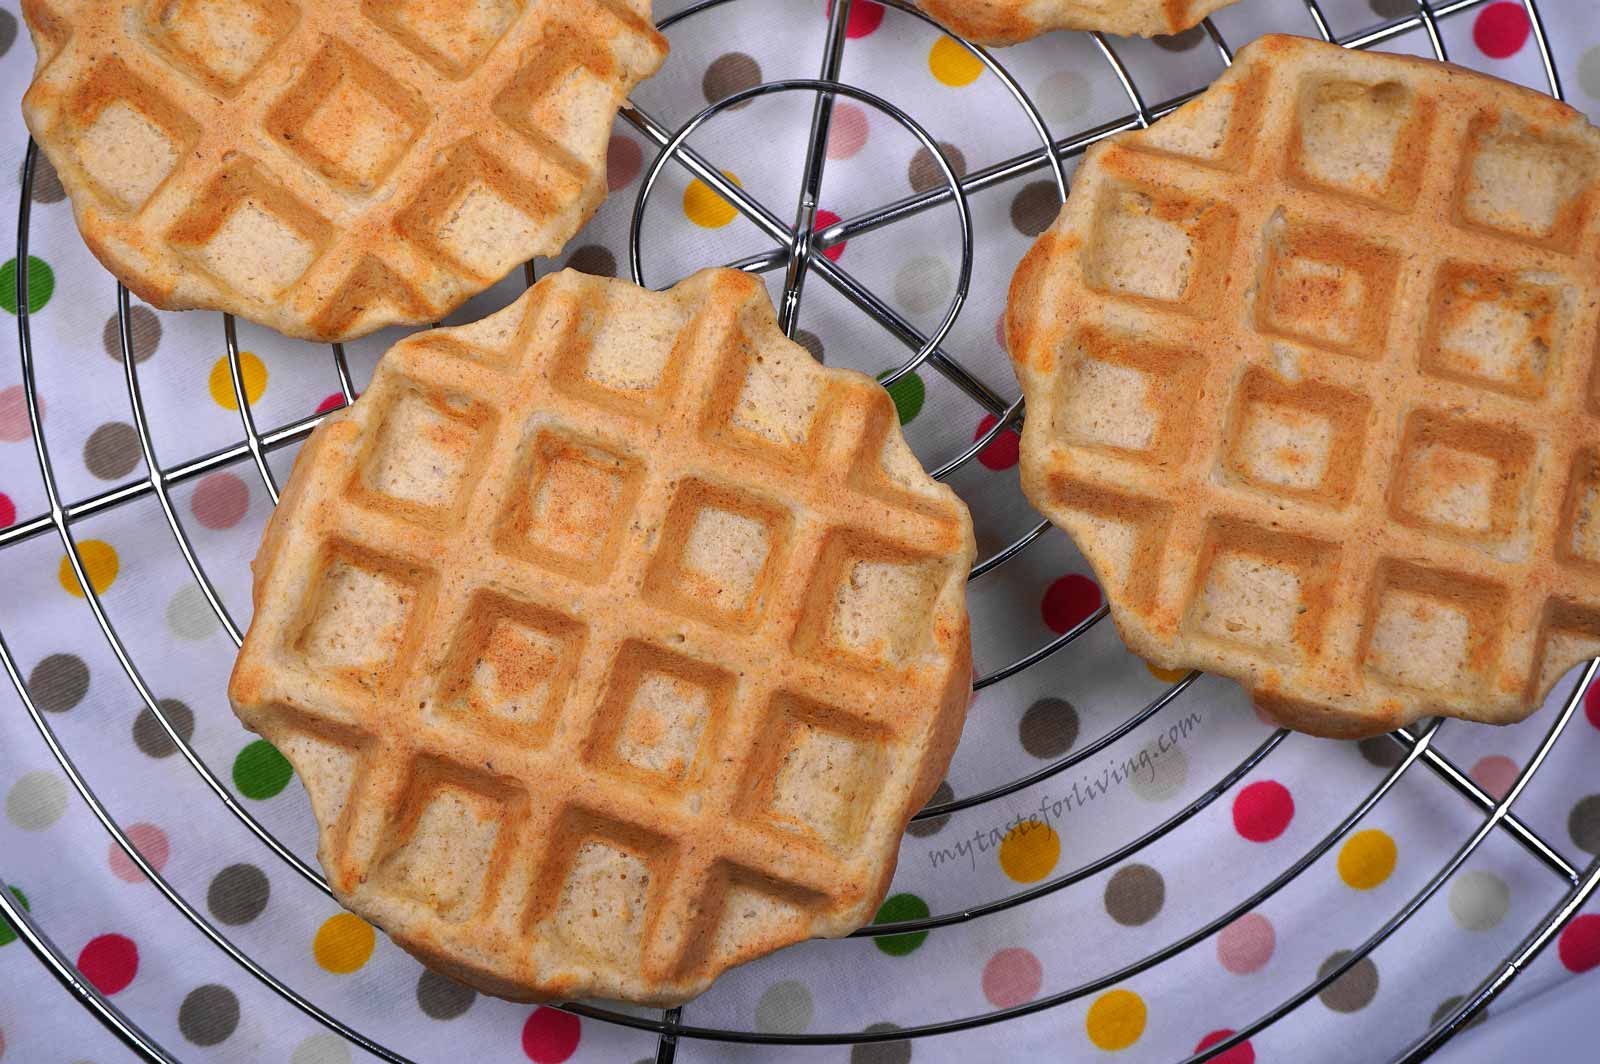 Quick to prepare and delicious protein waffles without flour. I prepare them with old fashioned rolled oats, eggs and cottage cheese.